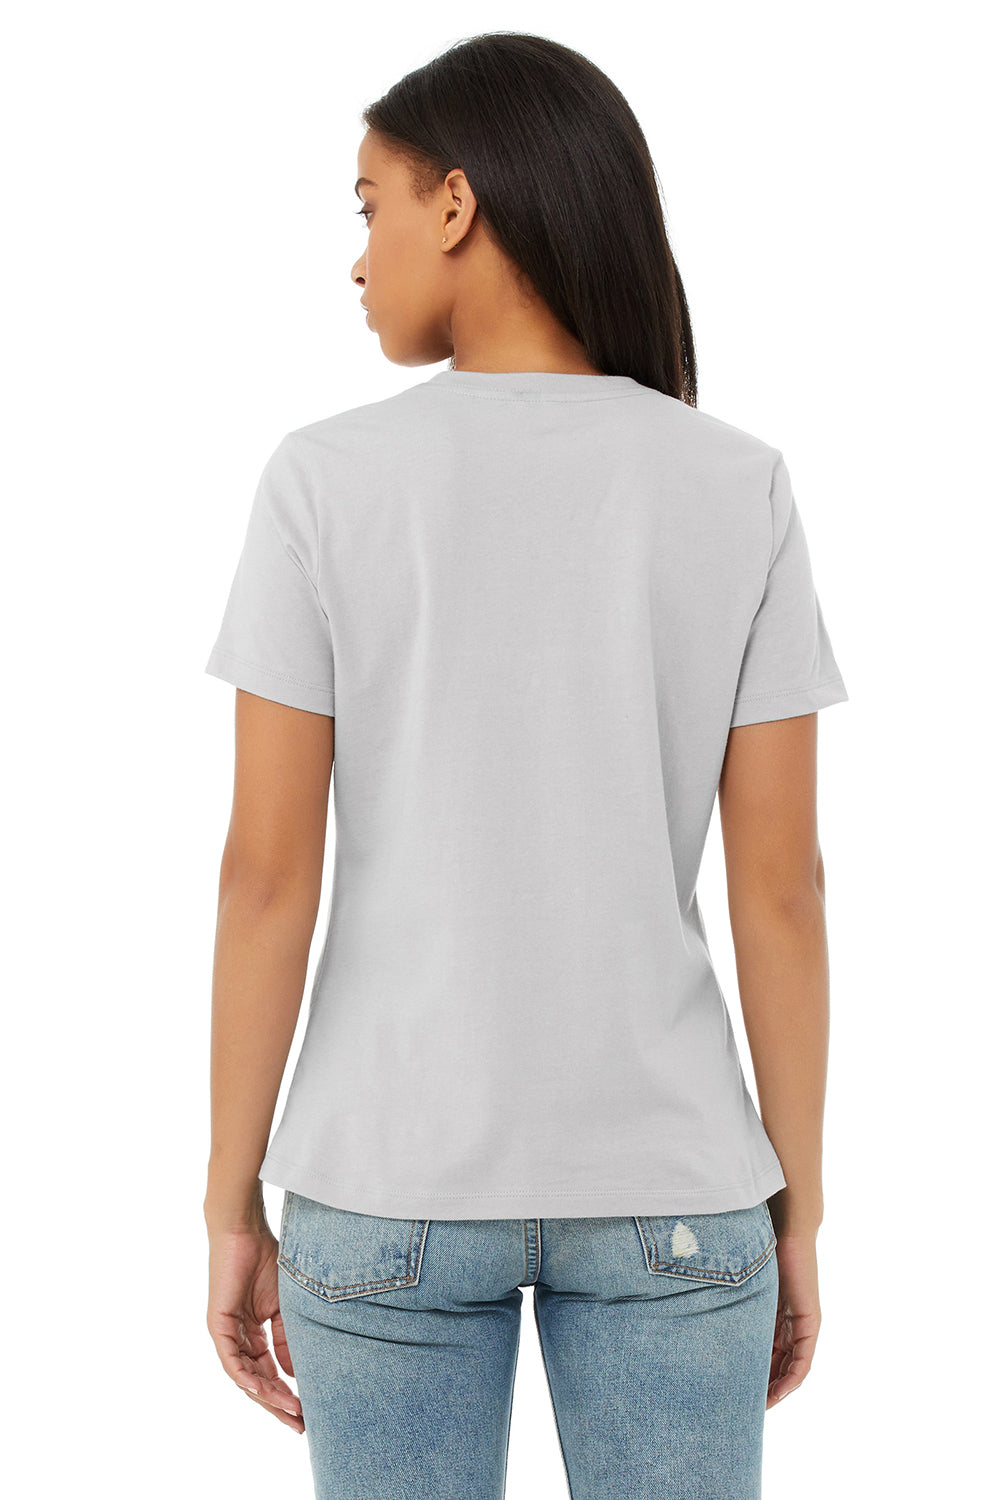 Bella + Canvas BC6400/B6400/6400 Womens Relaxed Jersey Short Sleeve Crewneck T-Shirt Solid Athletic Grey Model Back